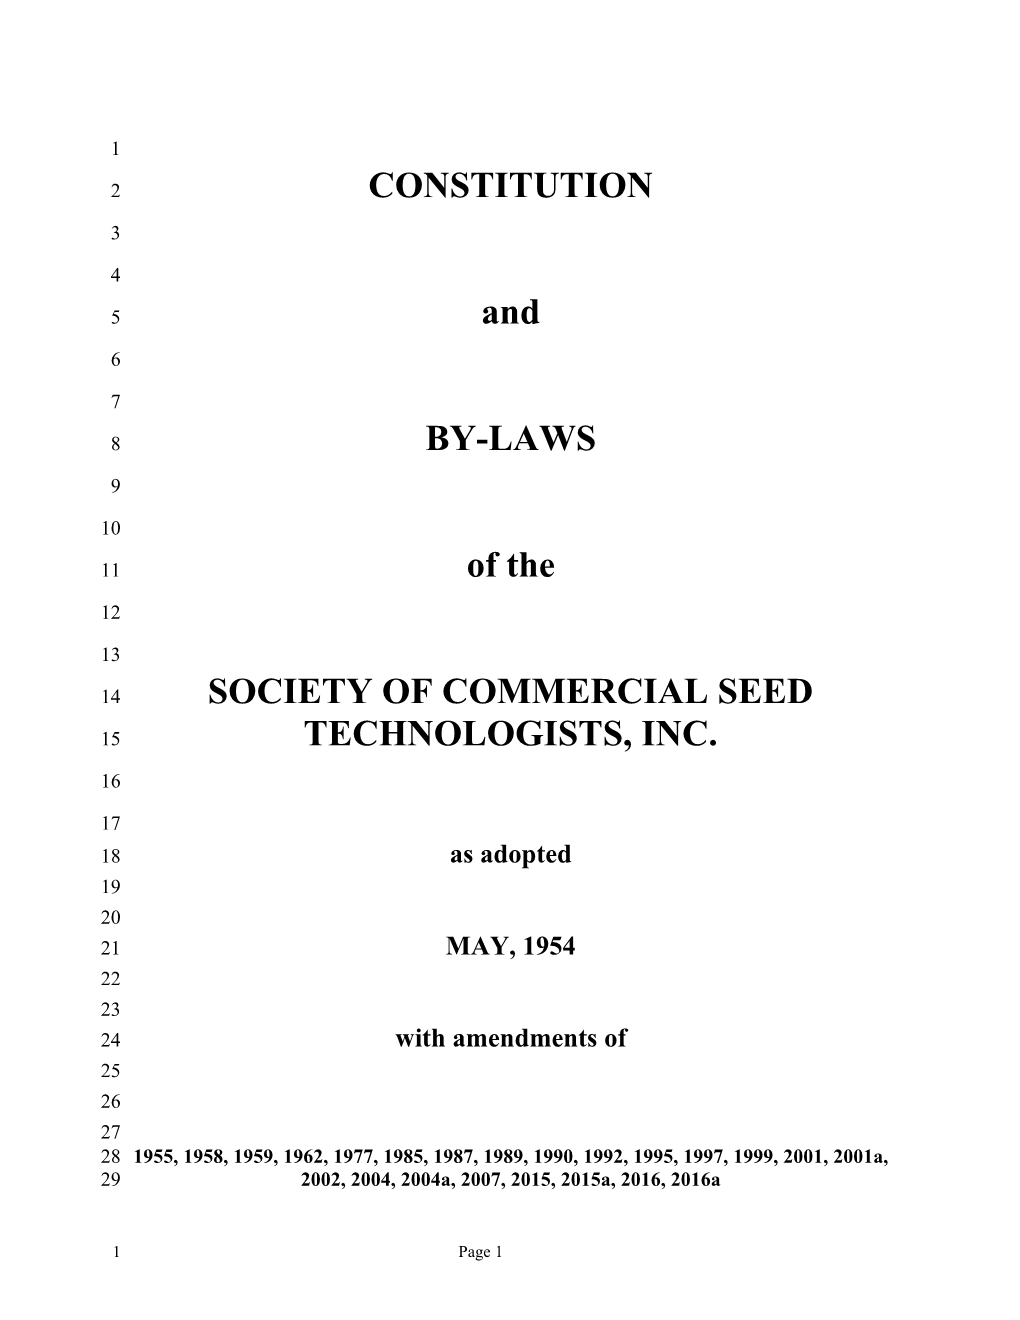 Society of Commercial Seed Technologists, Inc